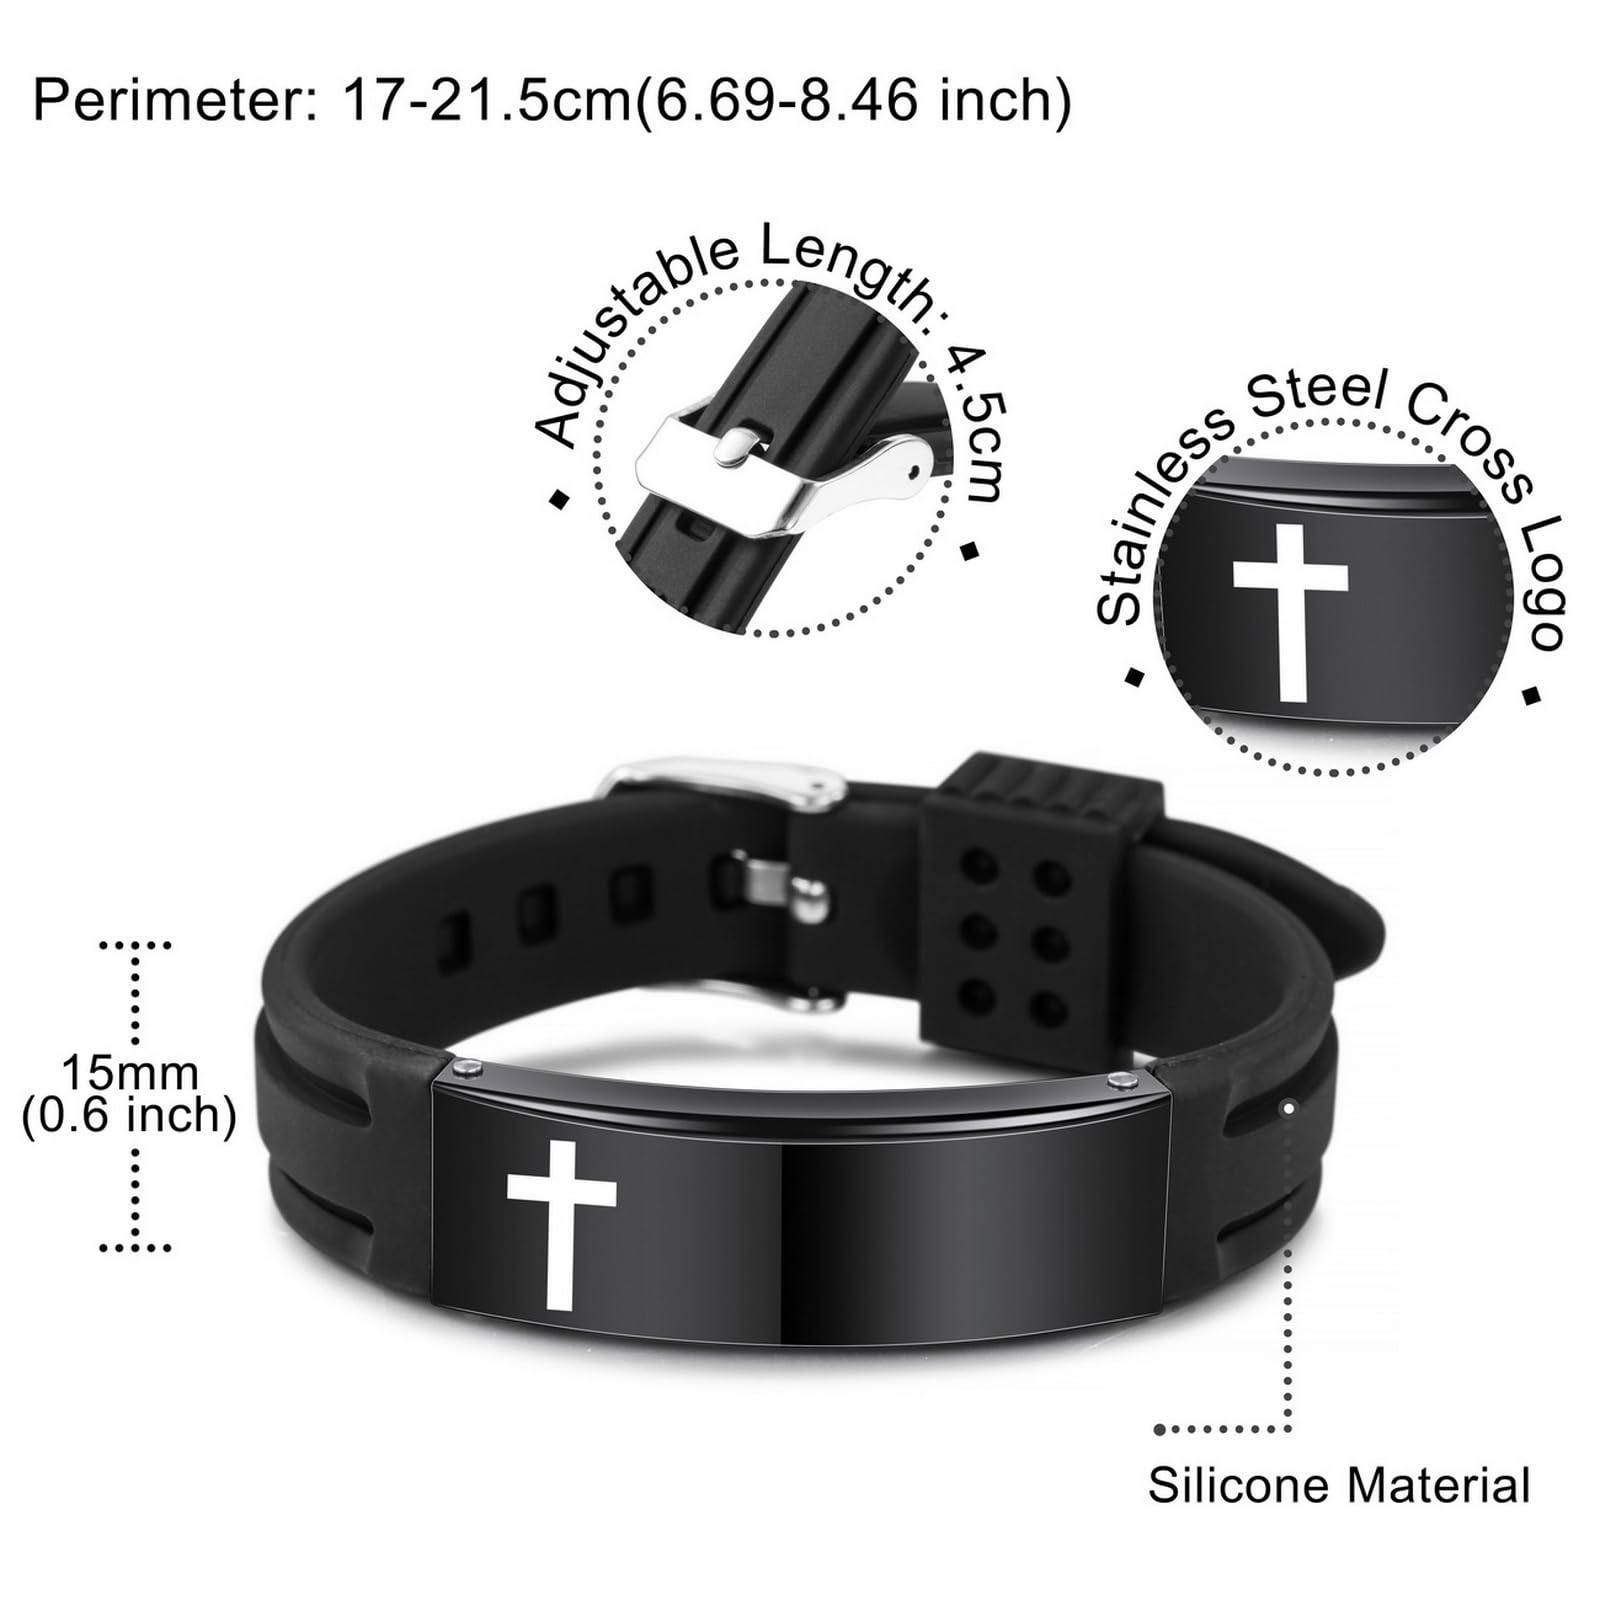 INBLUE Religious Quote Faith Christian Bible Verses Inspirational Powerful Scripture ID Wristband Cross Engraved Text Stainless Steel Adjustable Silicone Bracelets Gift for Men